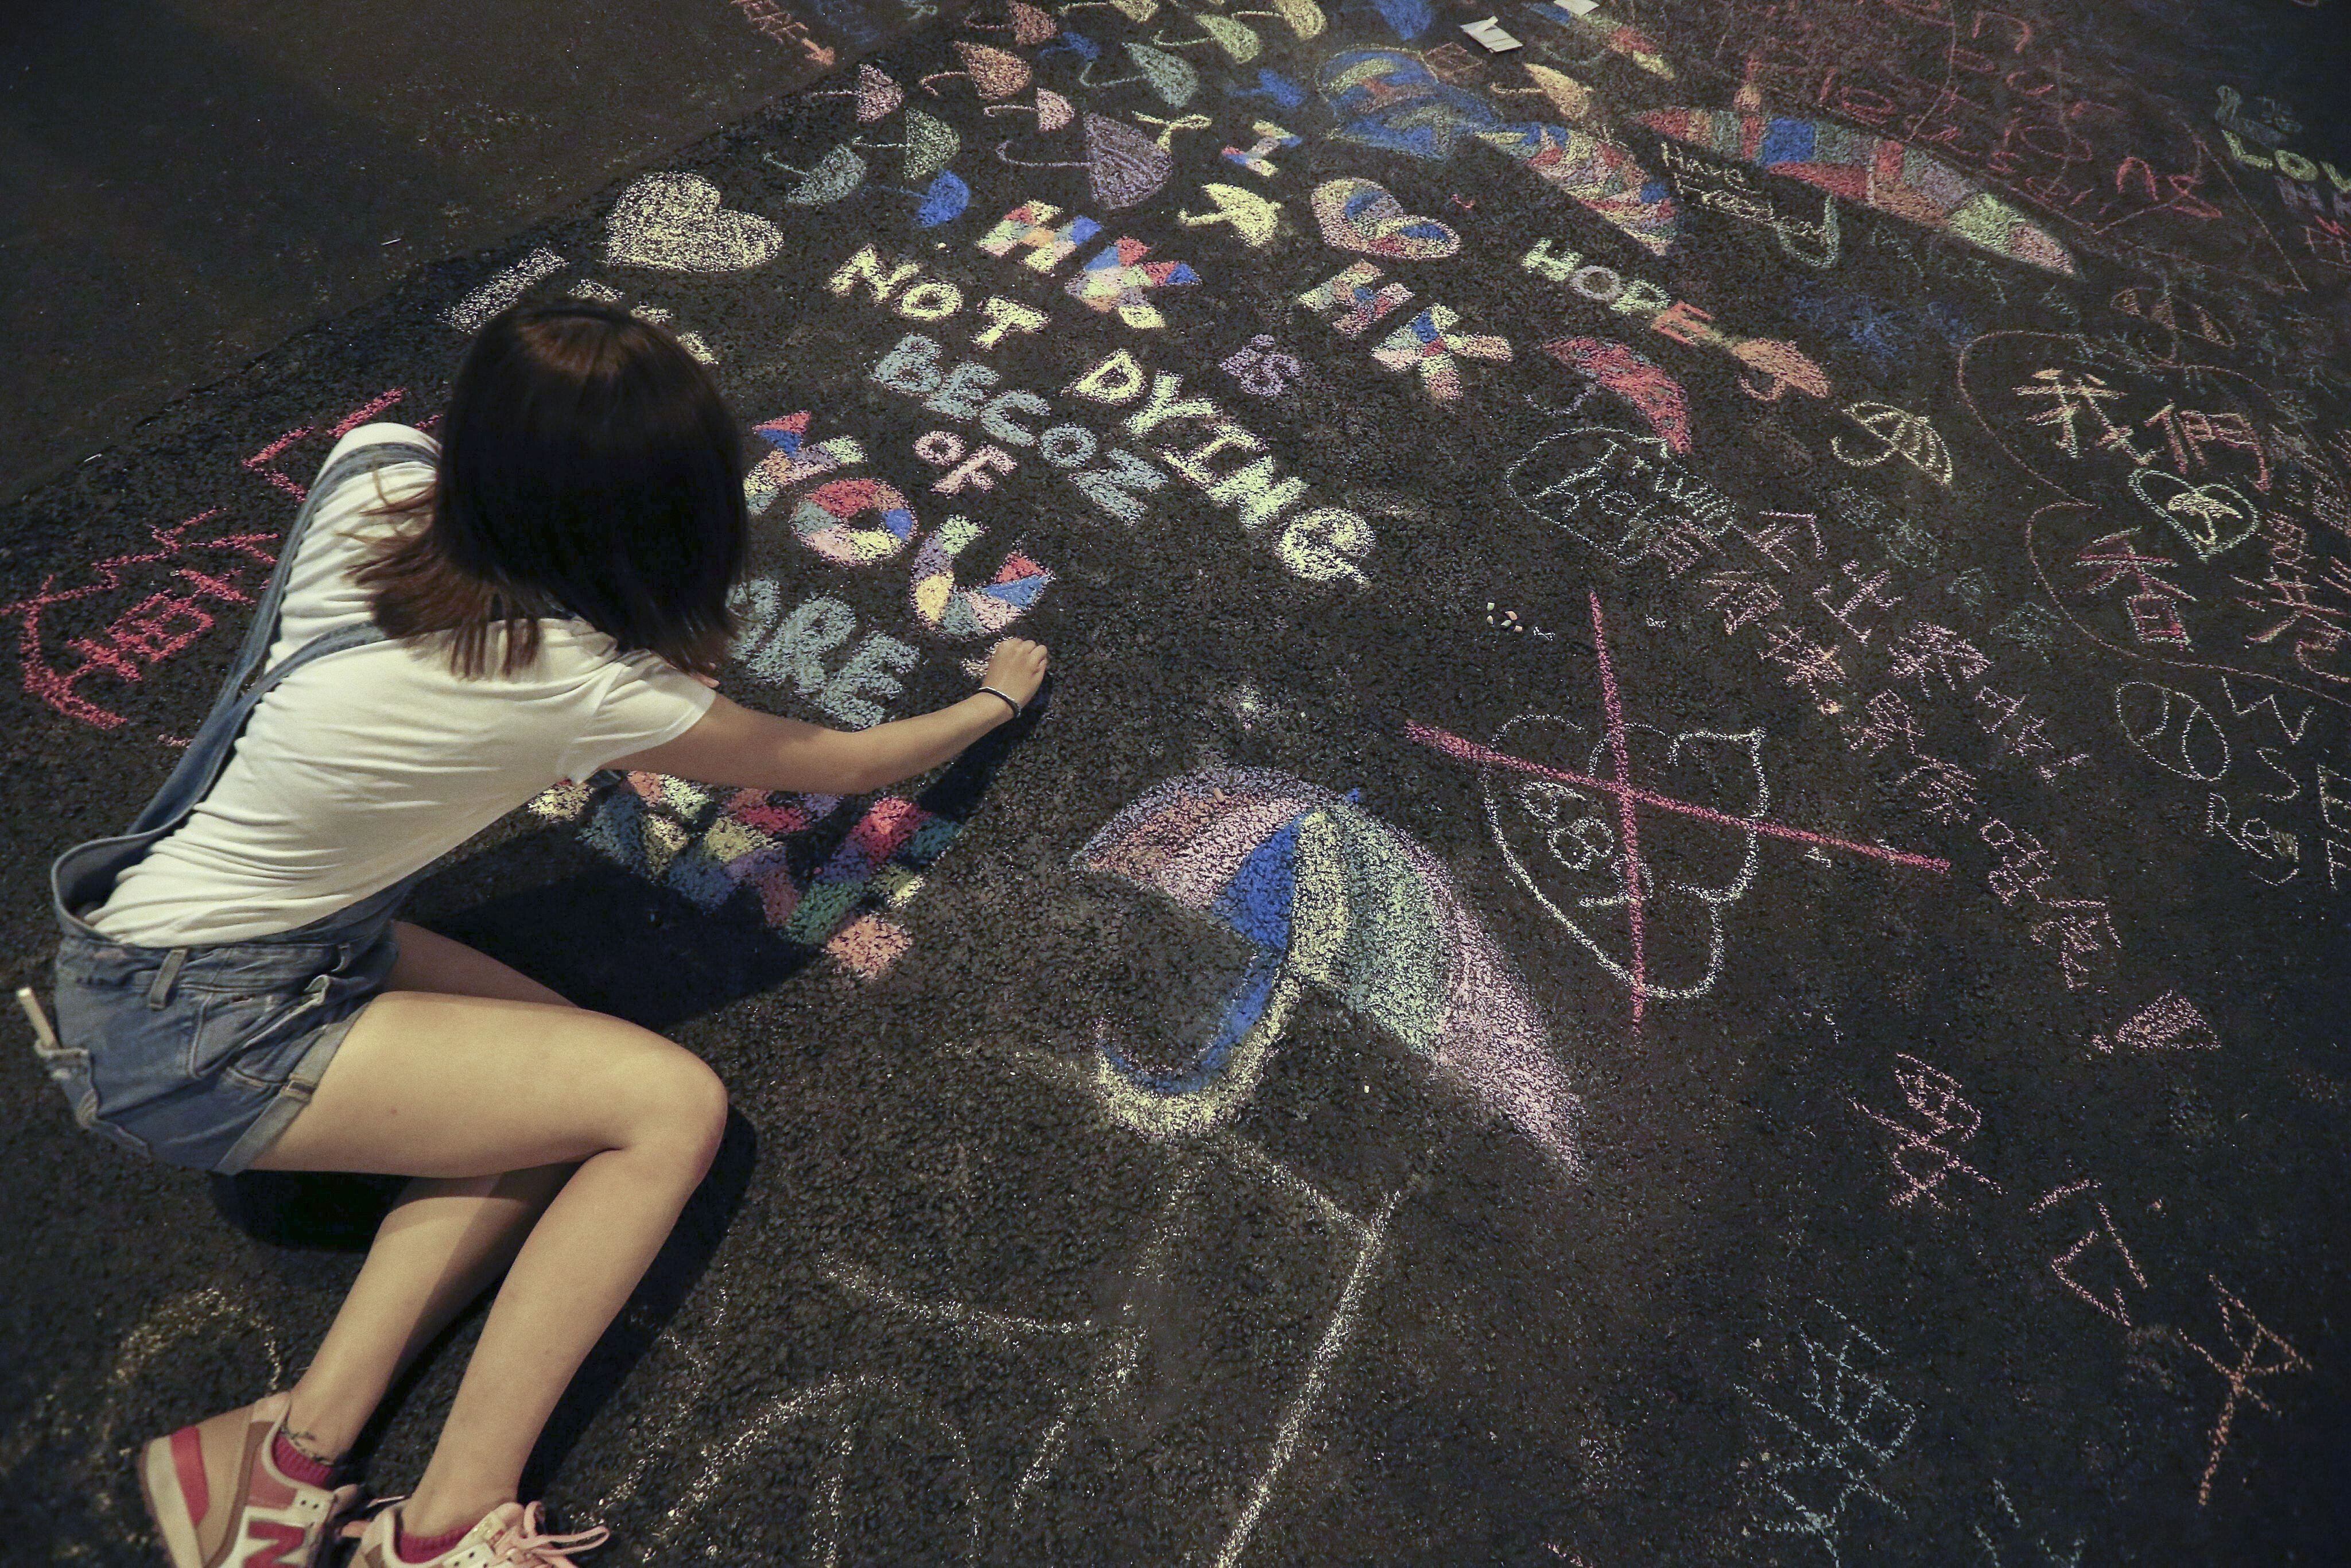 A young protester at Occupy Central in October 2014. Photo: EPA